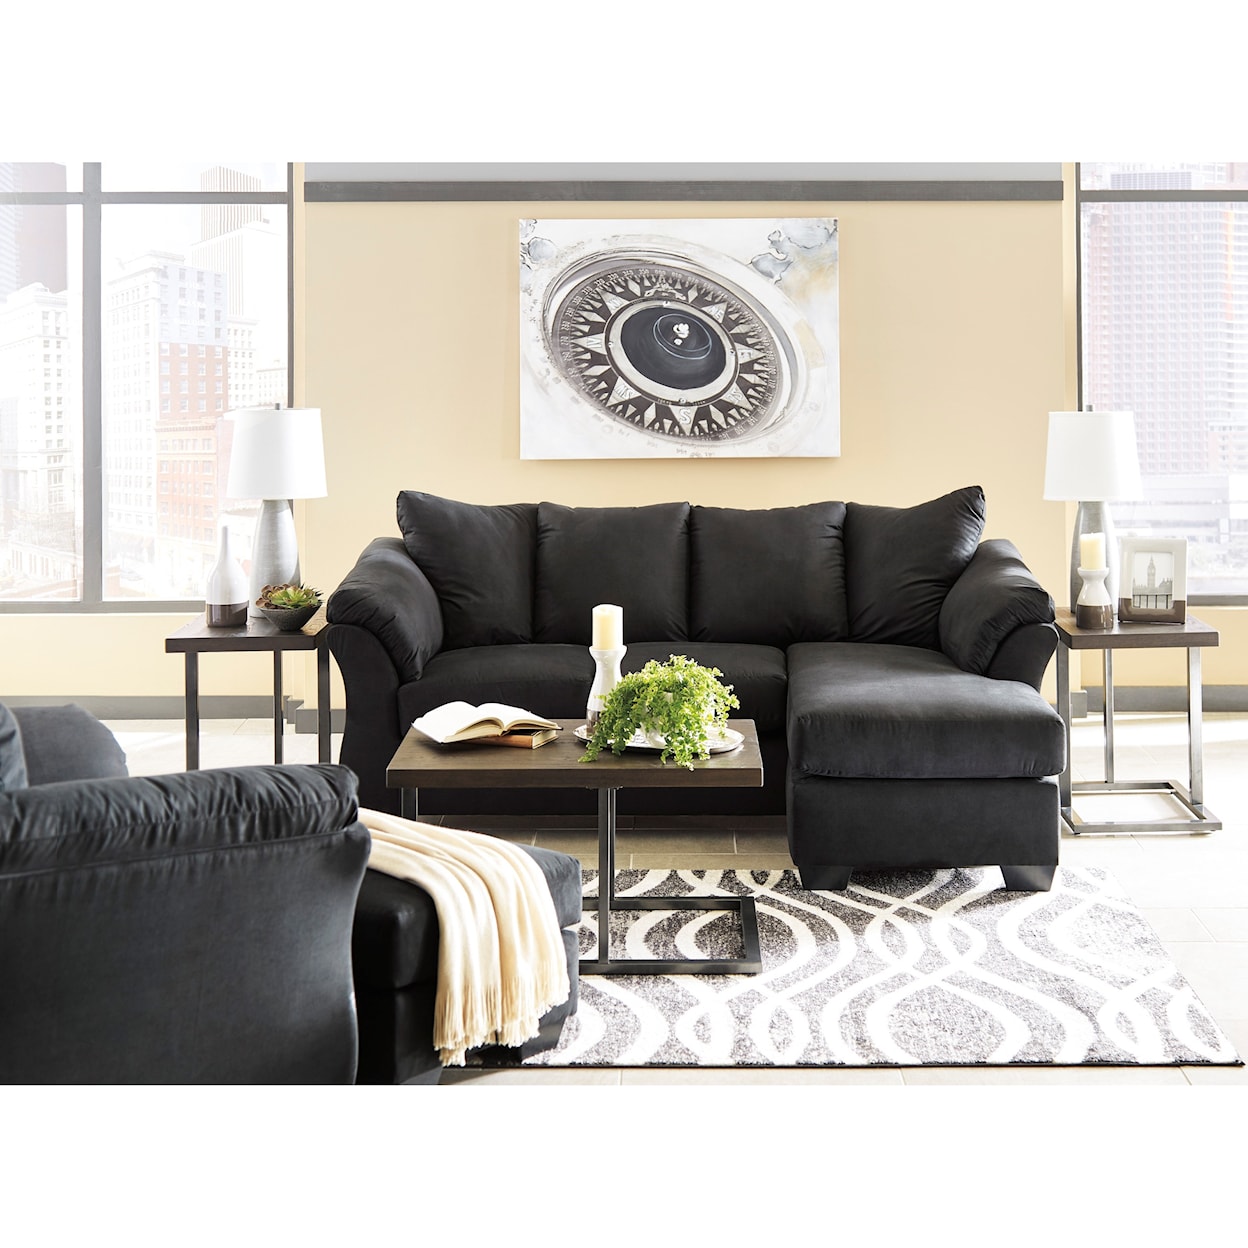 Signature Design by Ashley Darcy Stationary Living Room Group